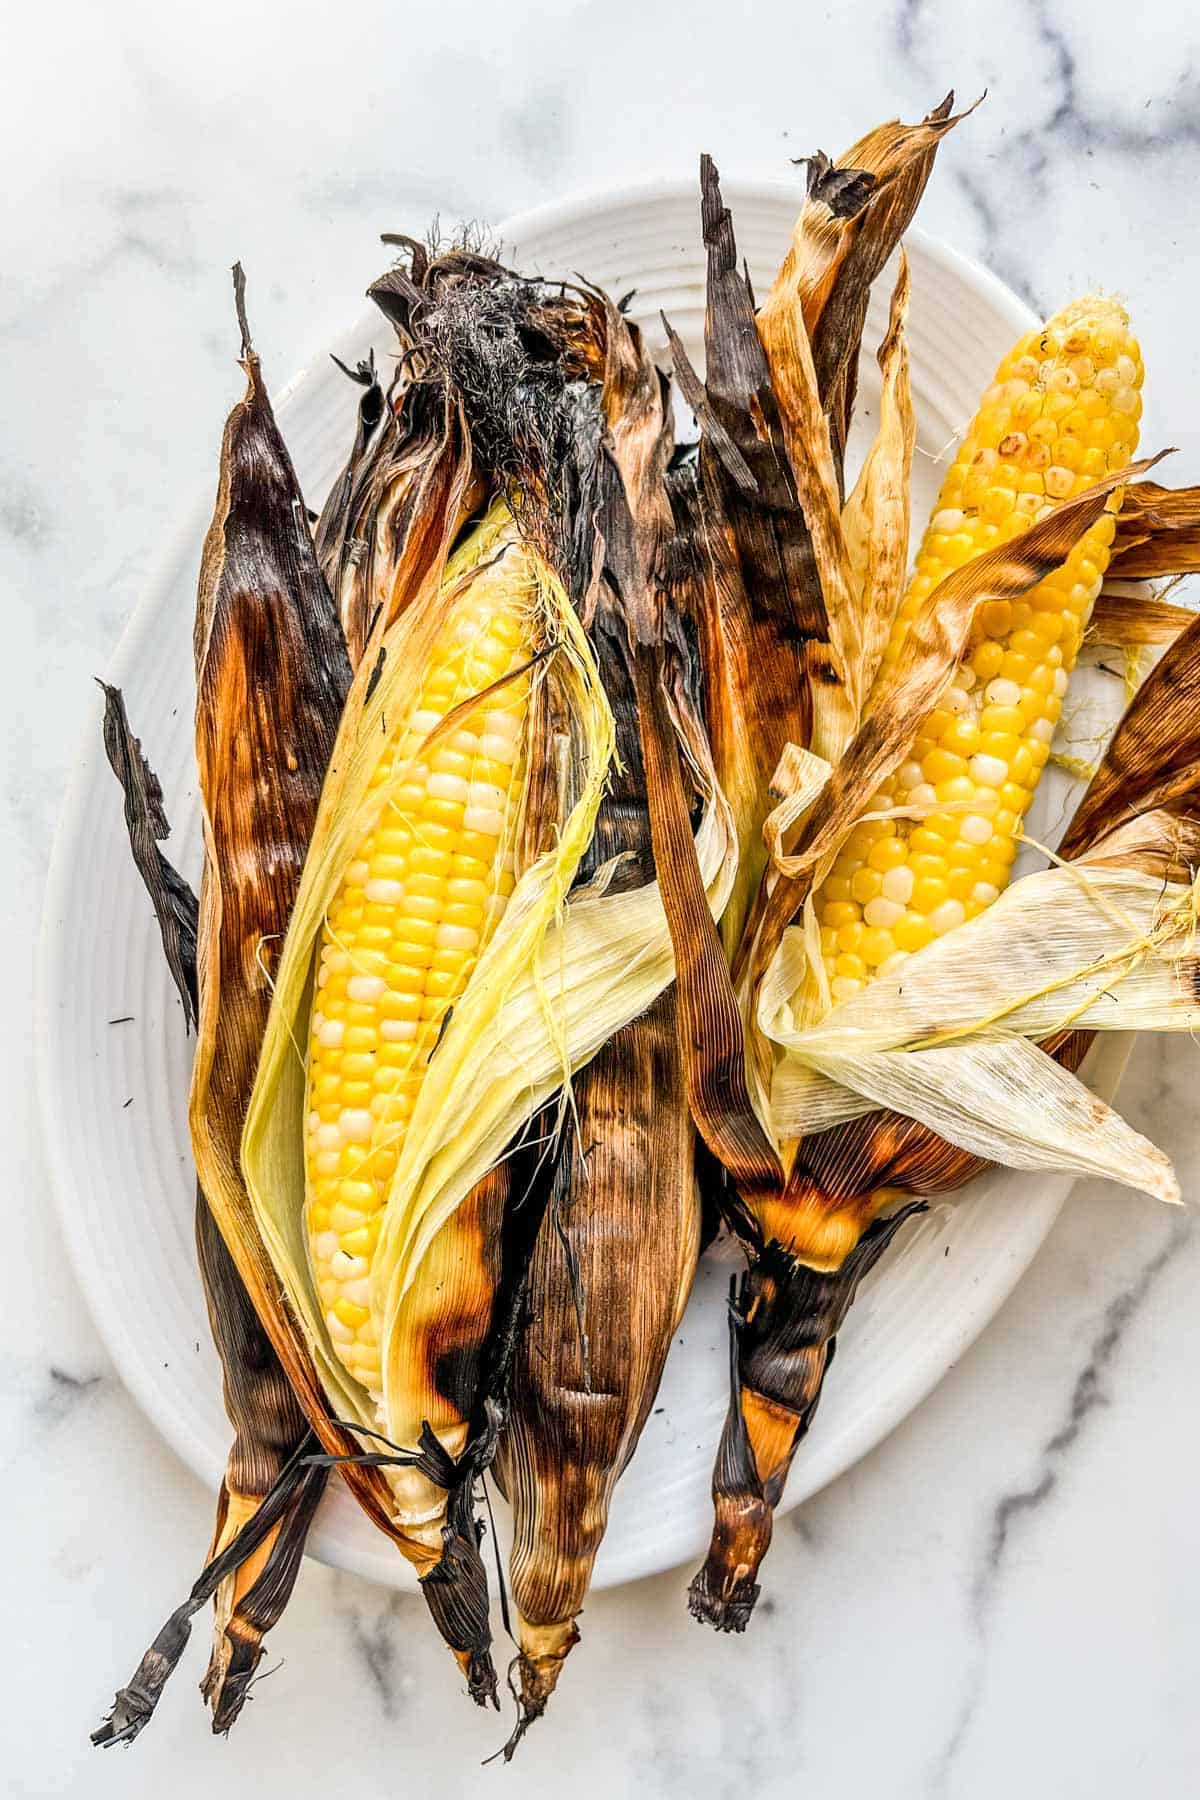 a pile of corn cobs in husks on a plate after grilling